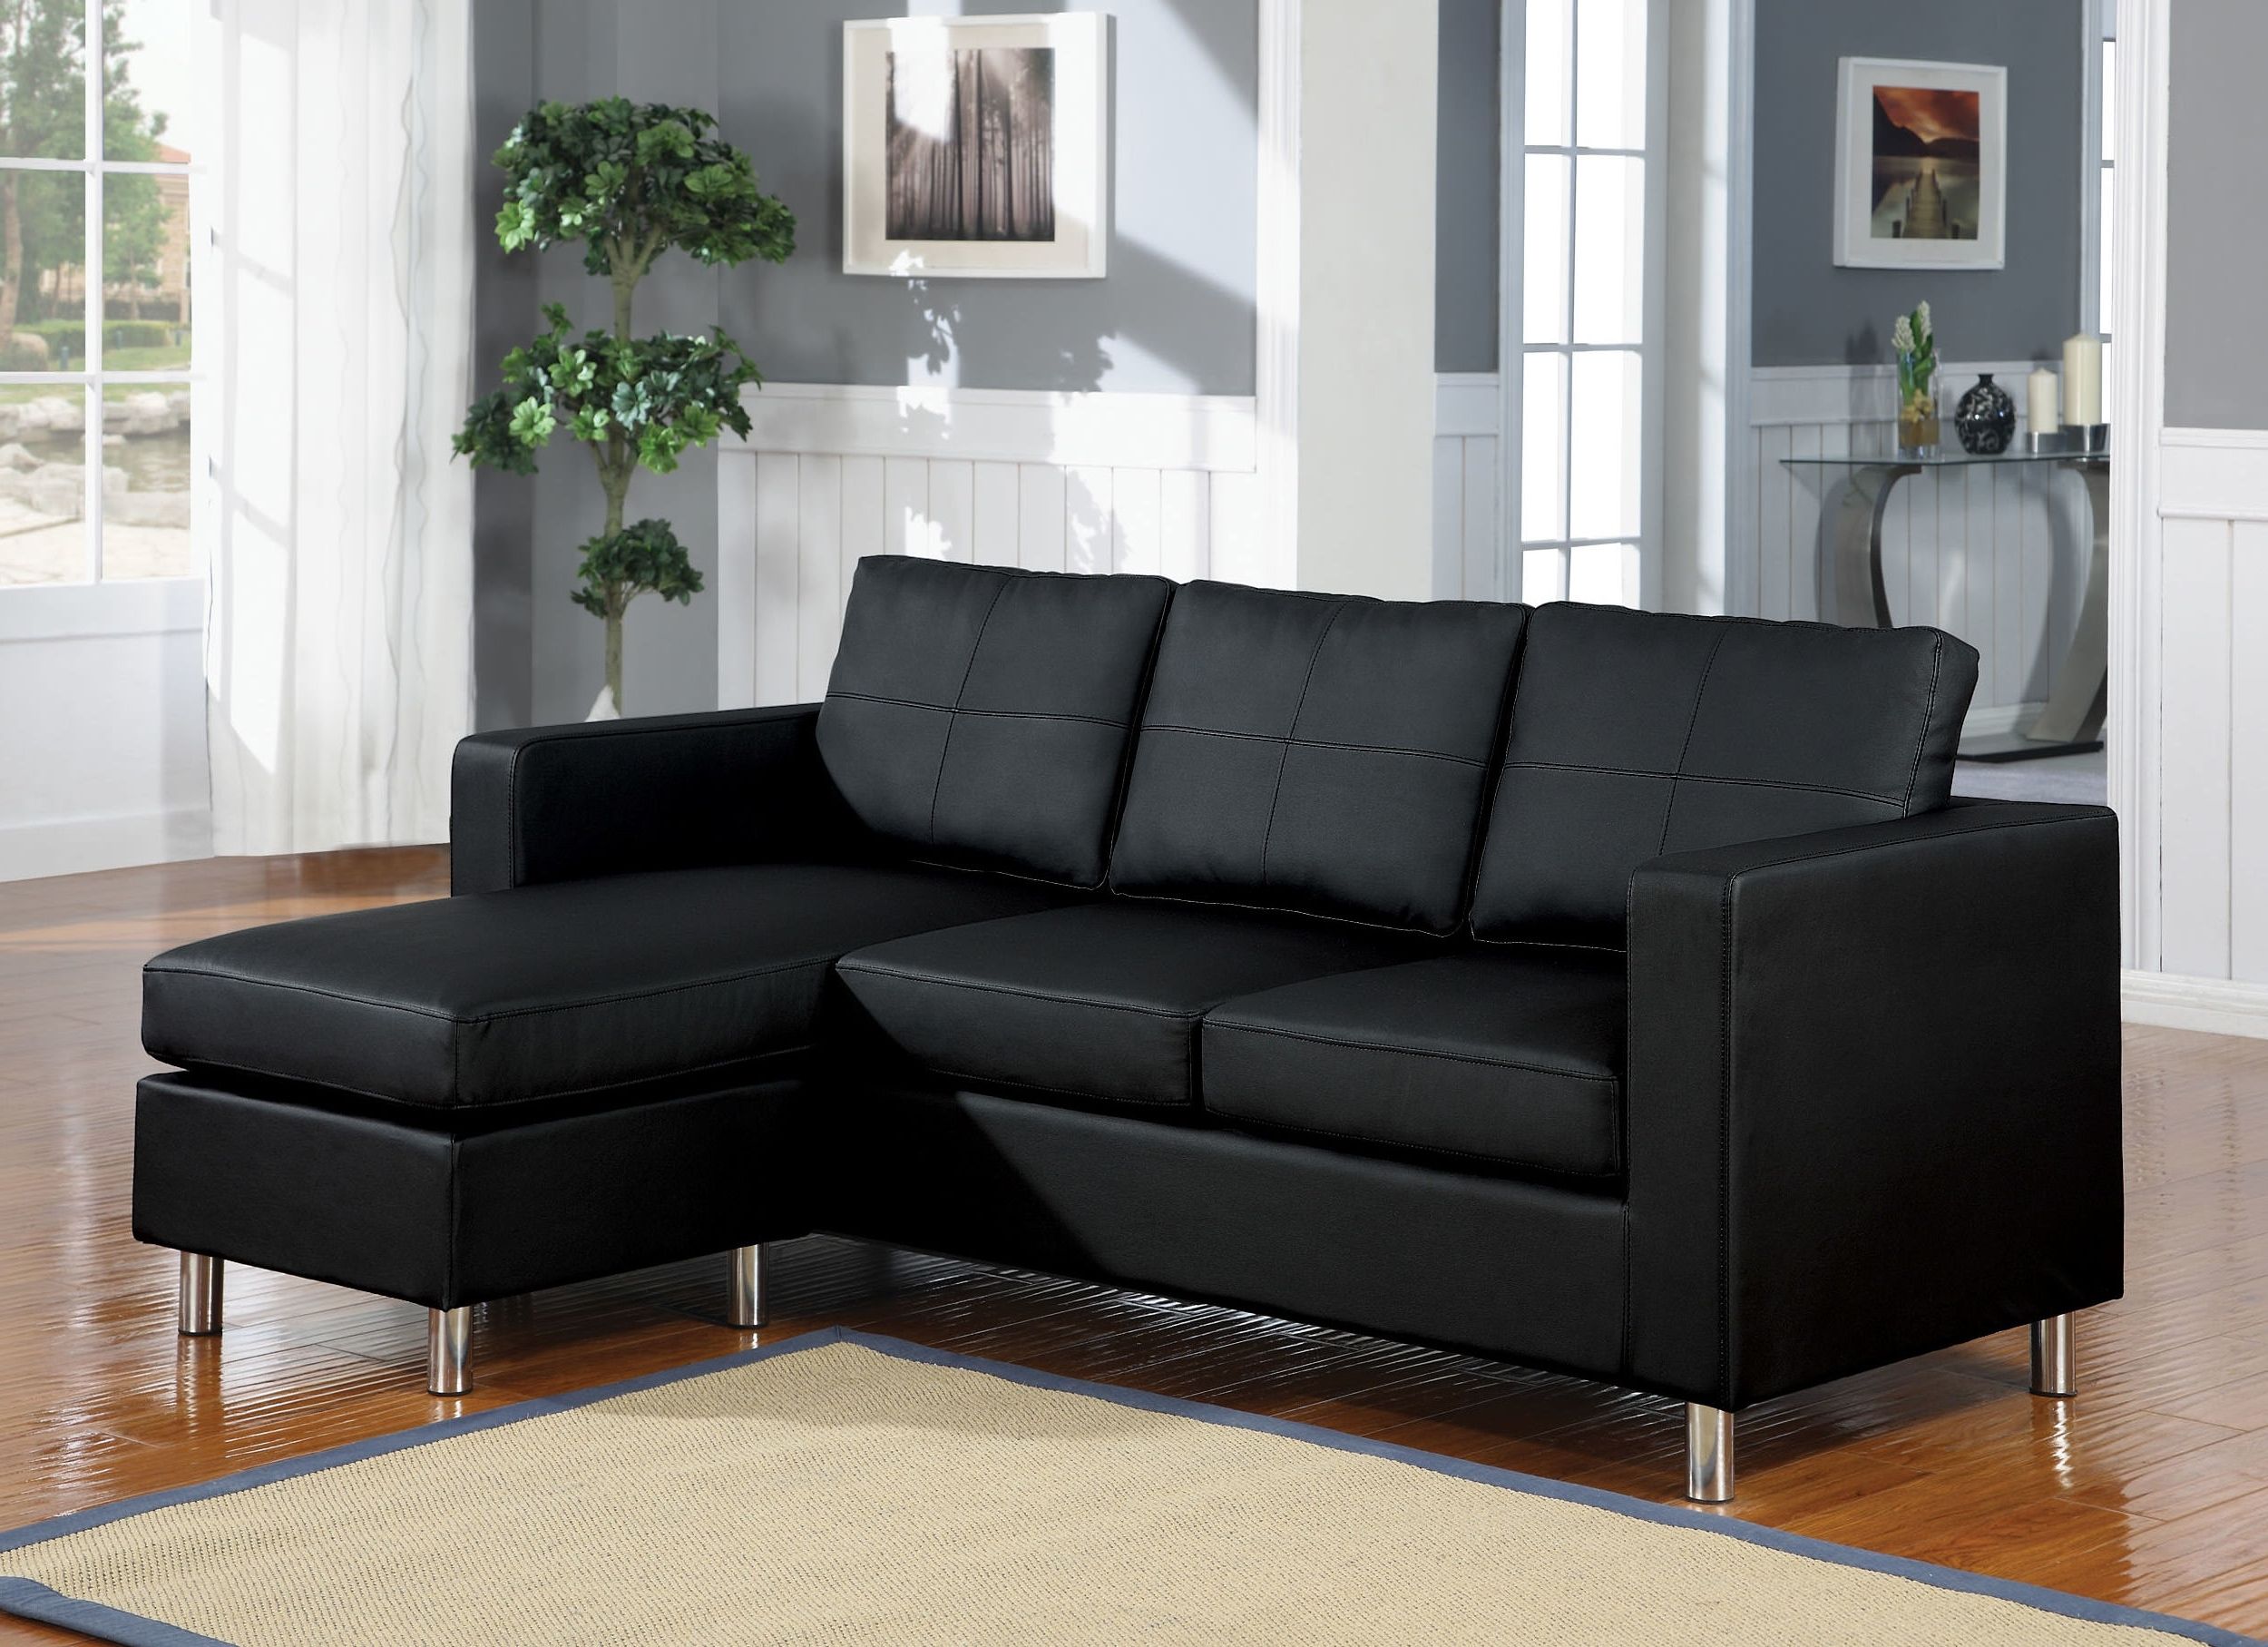 Modest Modular Sectional Sofas For Small Spaces In Decorating Room With Famous Small Modular Sectional Sofas (View 4 of 15)